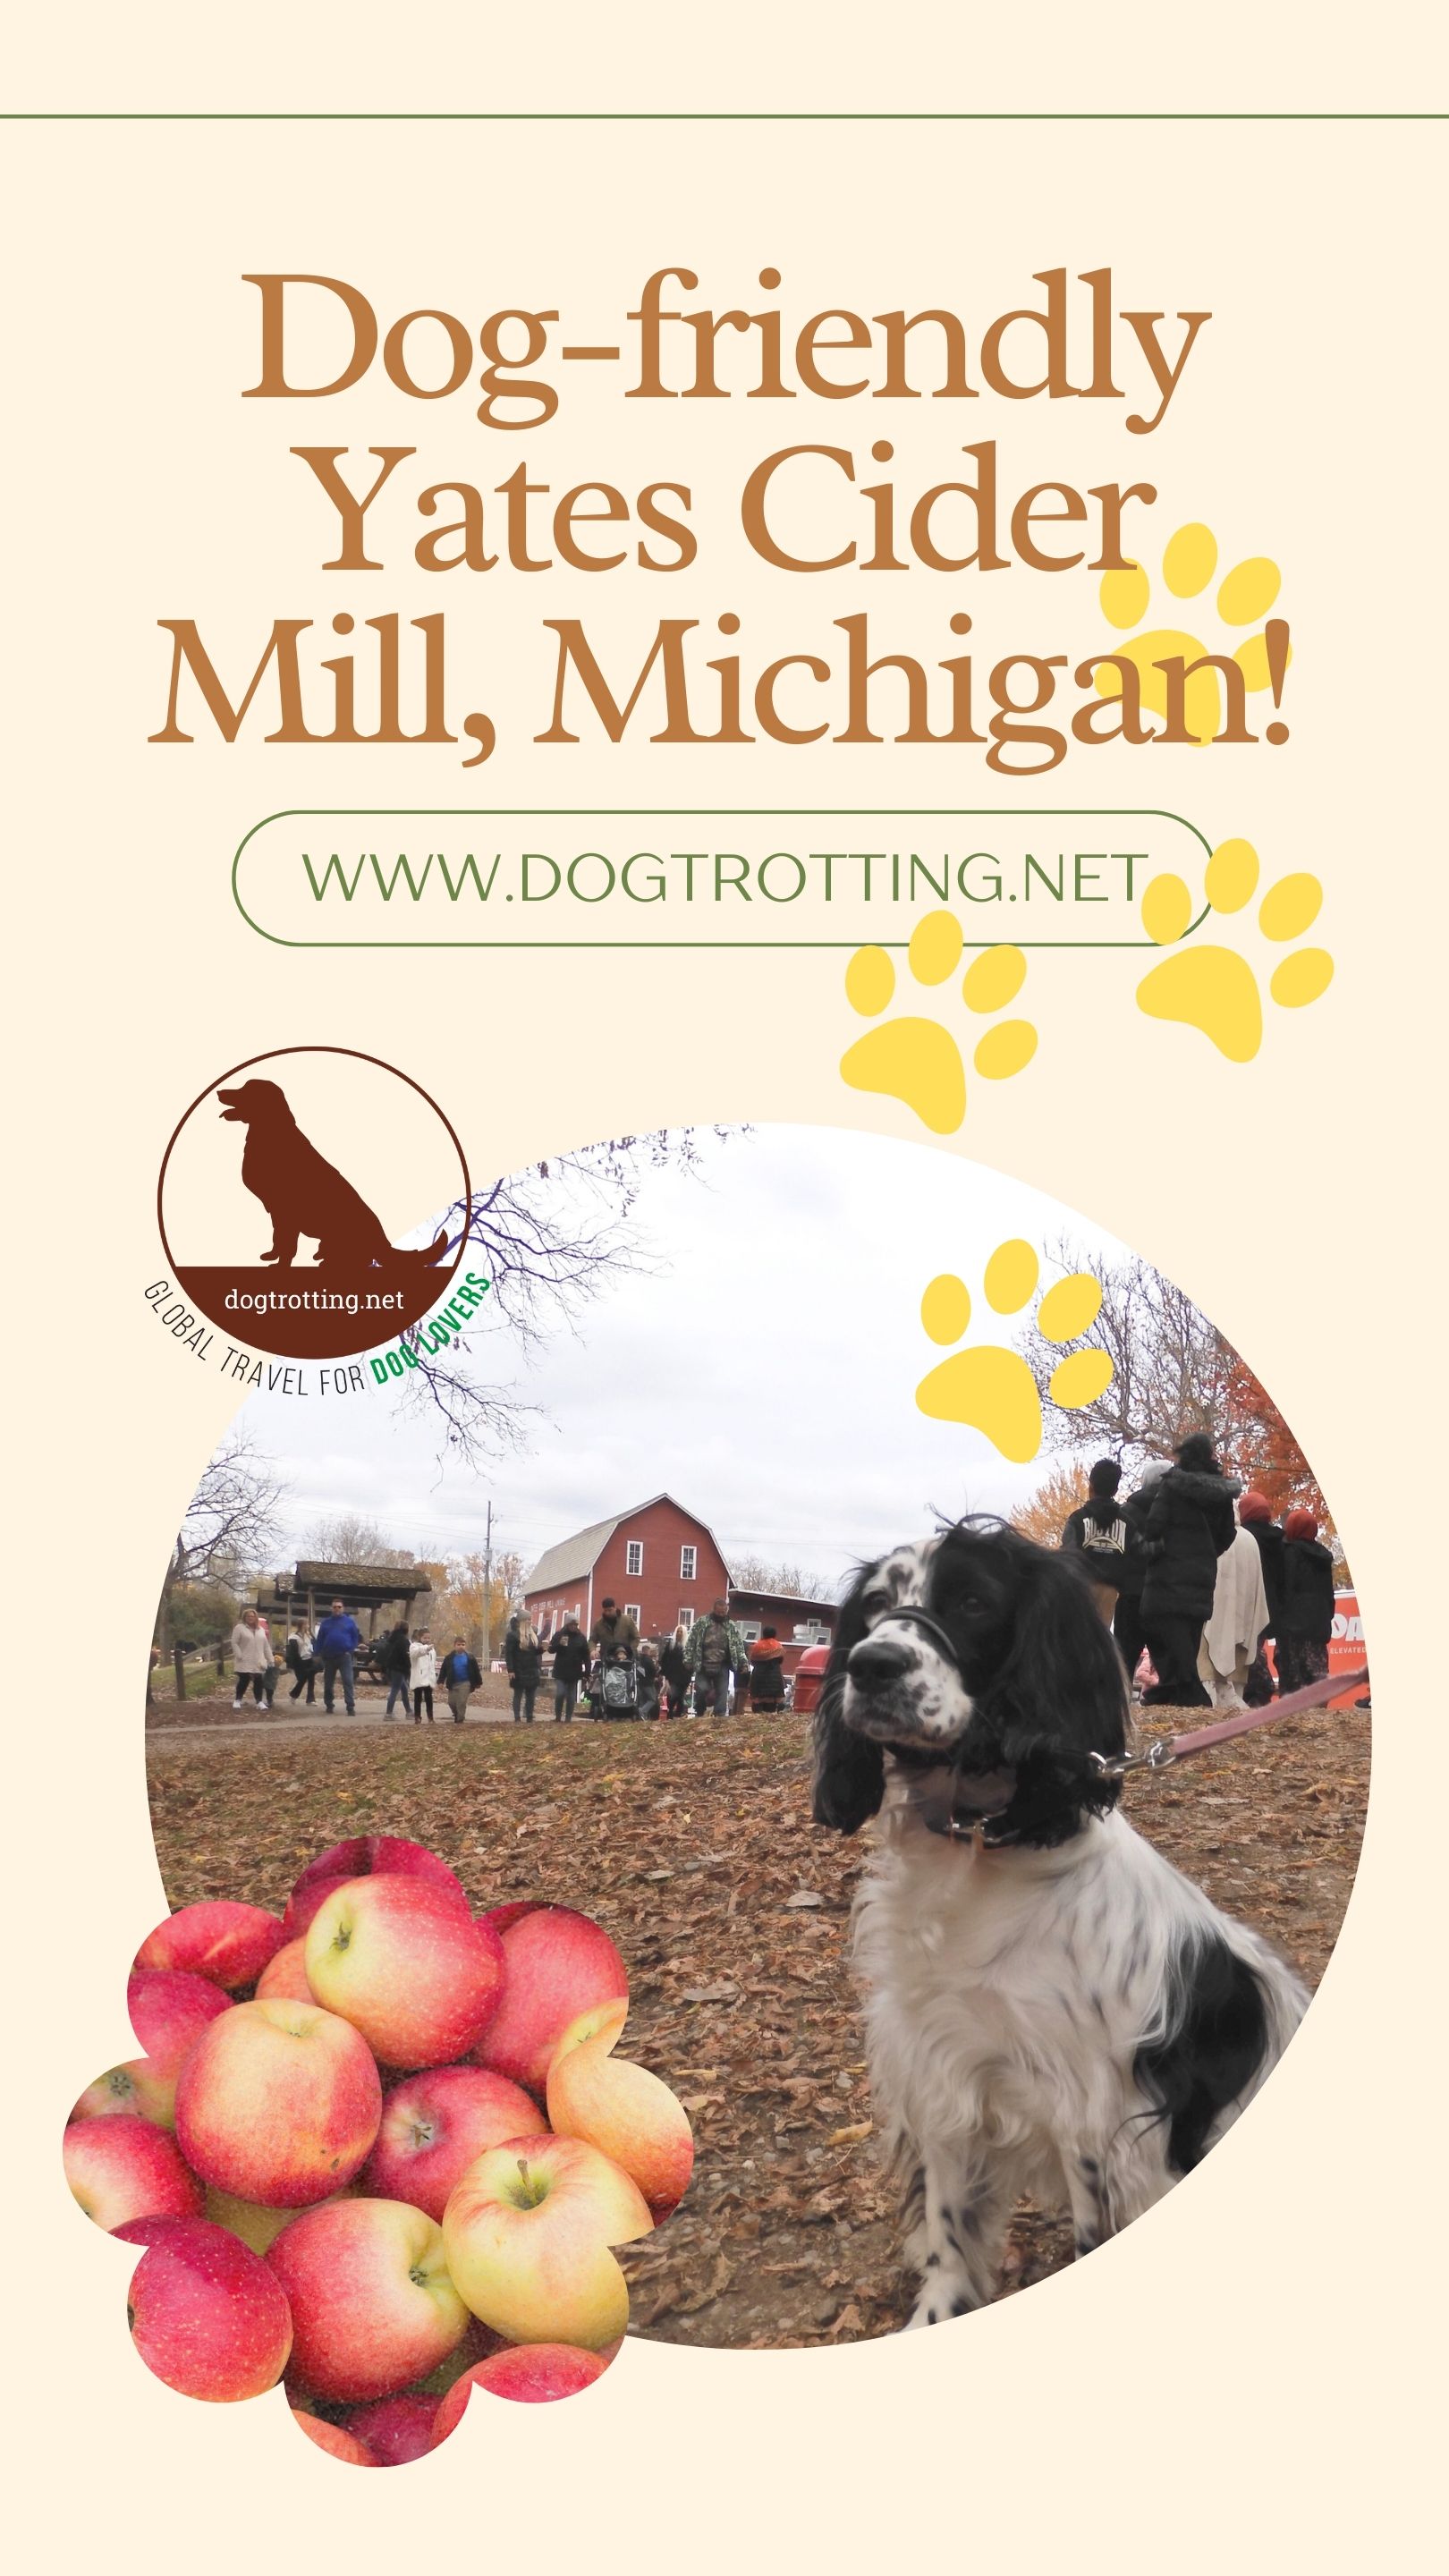 poster advertising dog-friendly Yates Cider Mill in Michigan